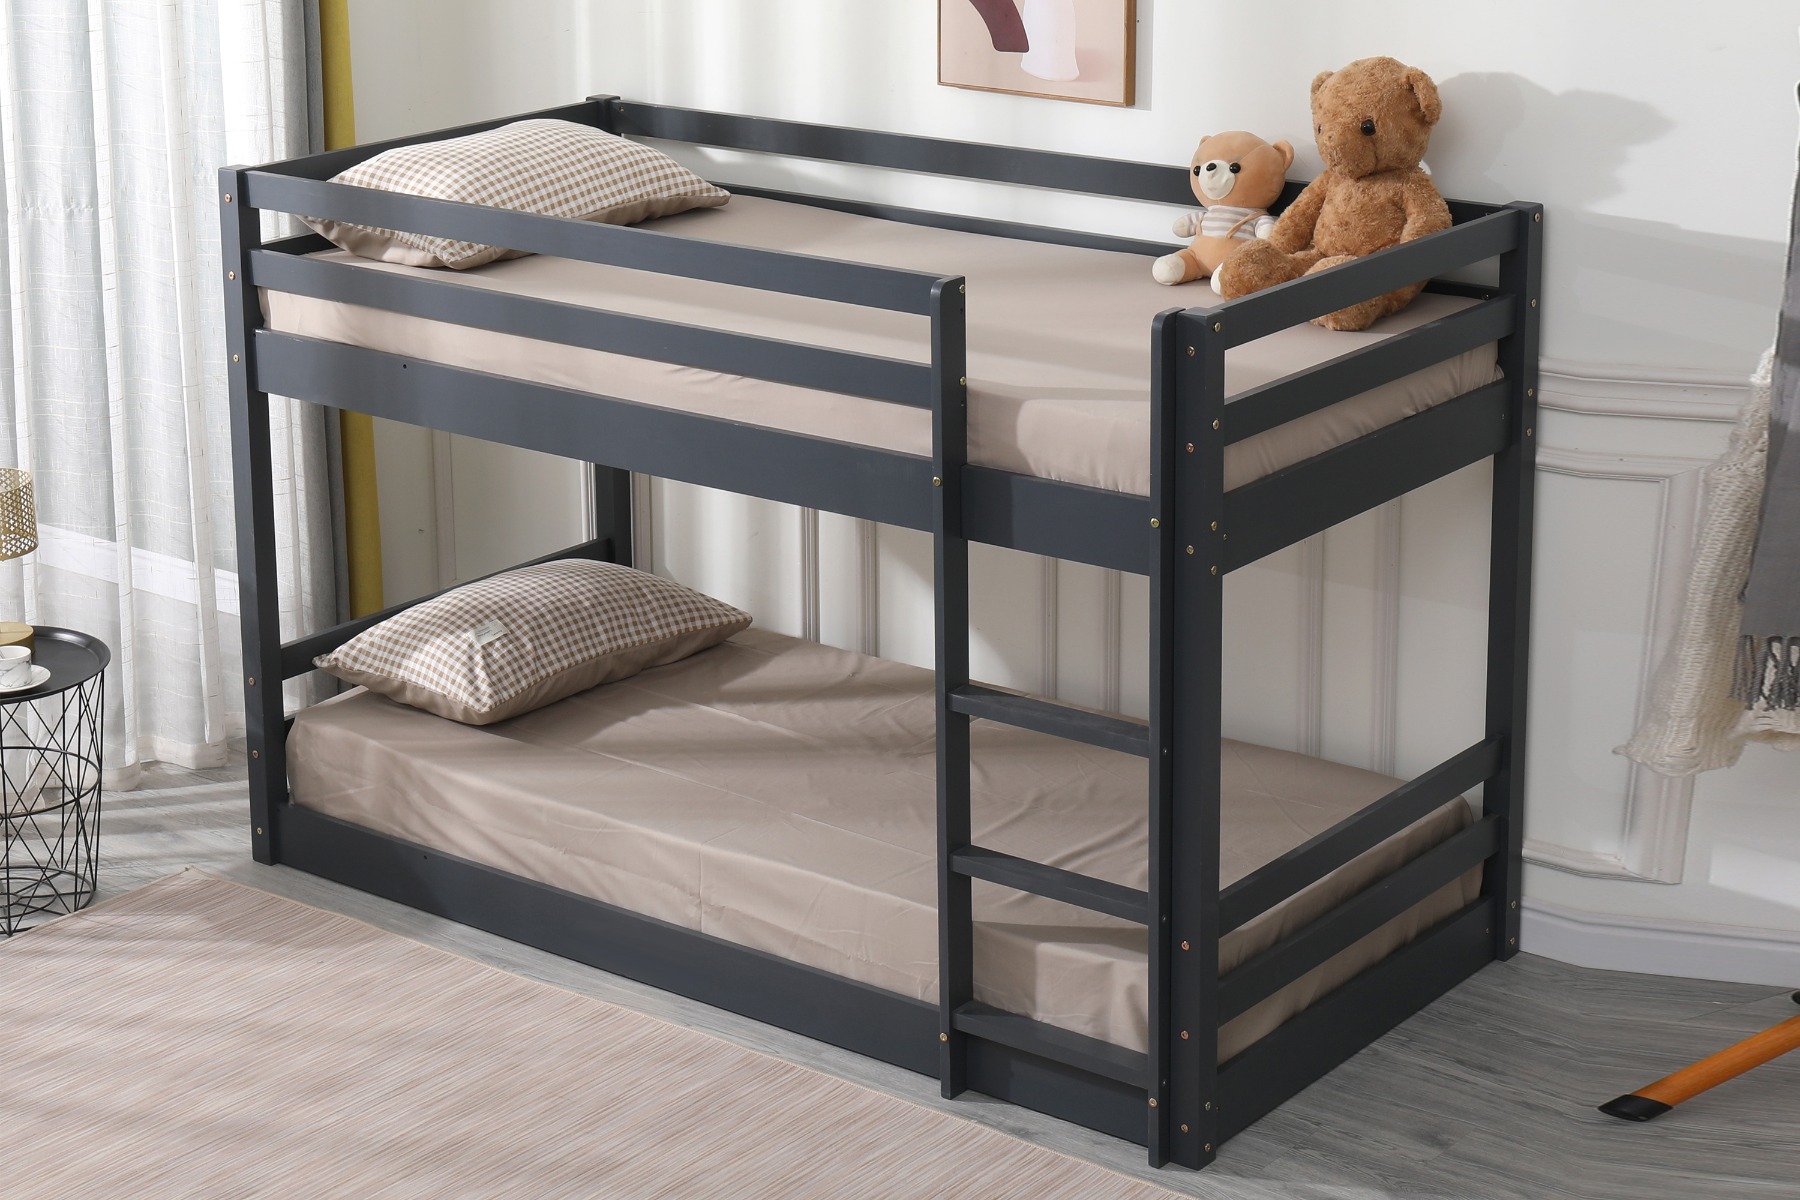 Flair Wooden Spark Low Bunk Bed Grey